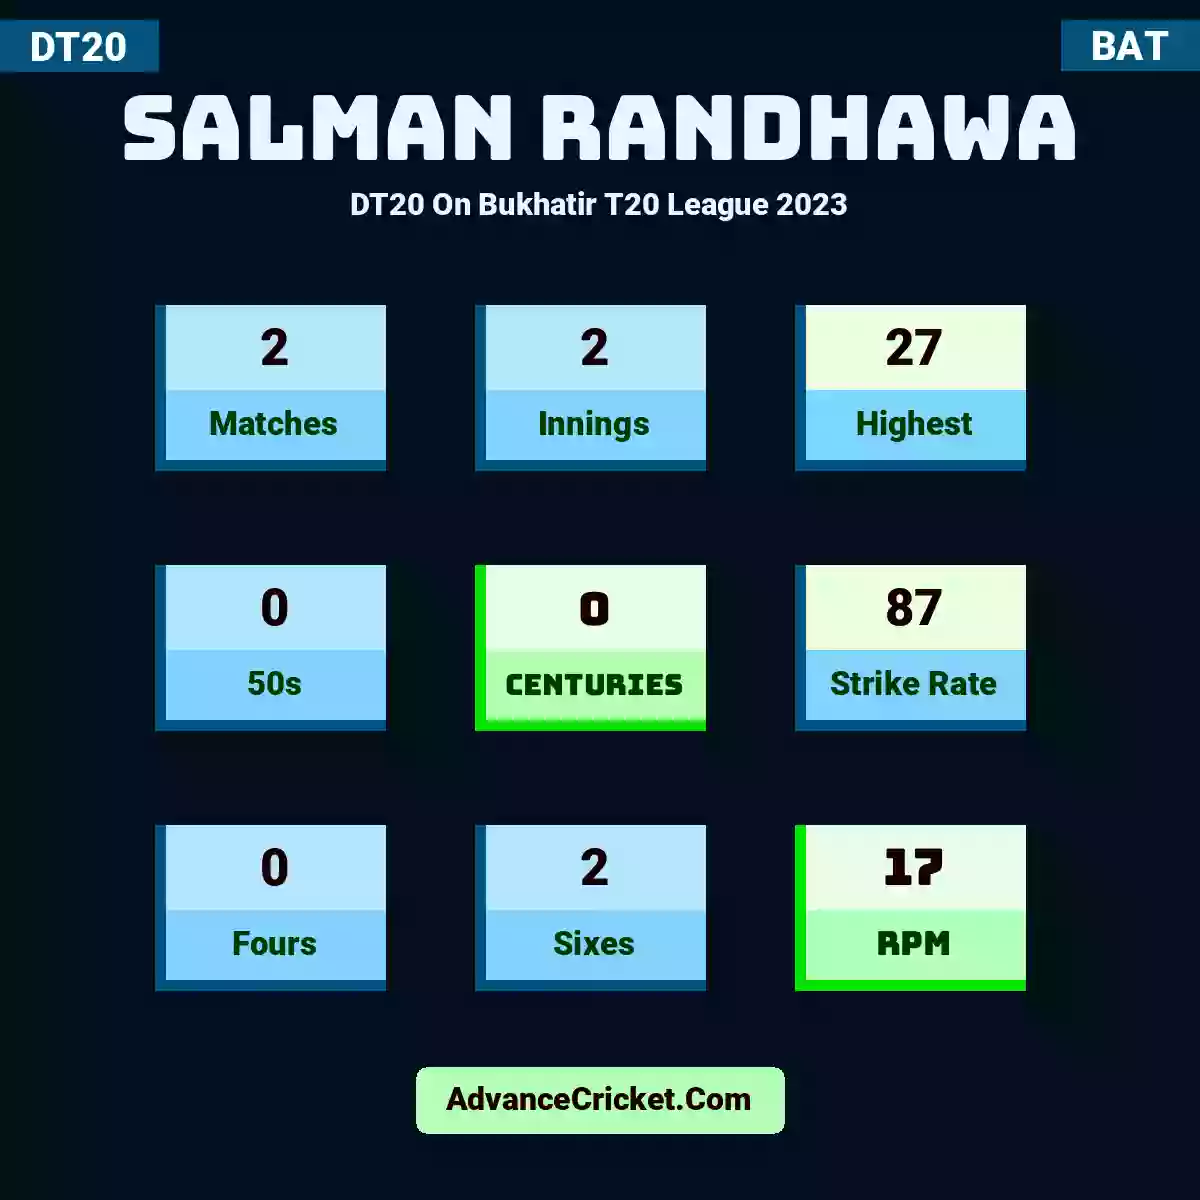 Salman Randhawa DT20  On Bukhatir T20 League 2023, Salman Randhawa played 2 matches, scored 27 runs as highest, 0 half-centuries, and 0 centuries, with a strike rate of 87. S.Randhawa hit 0 fours and 2 sixes, with an RPM of 17.